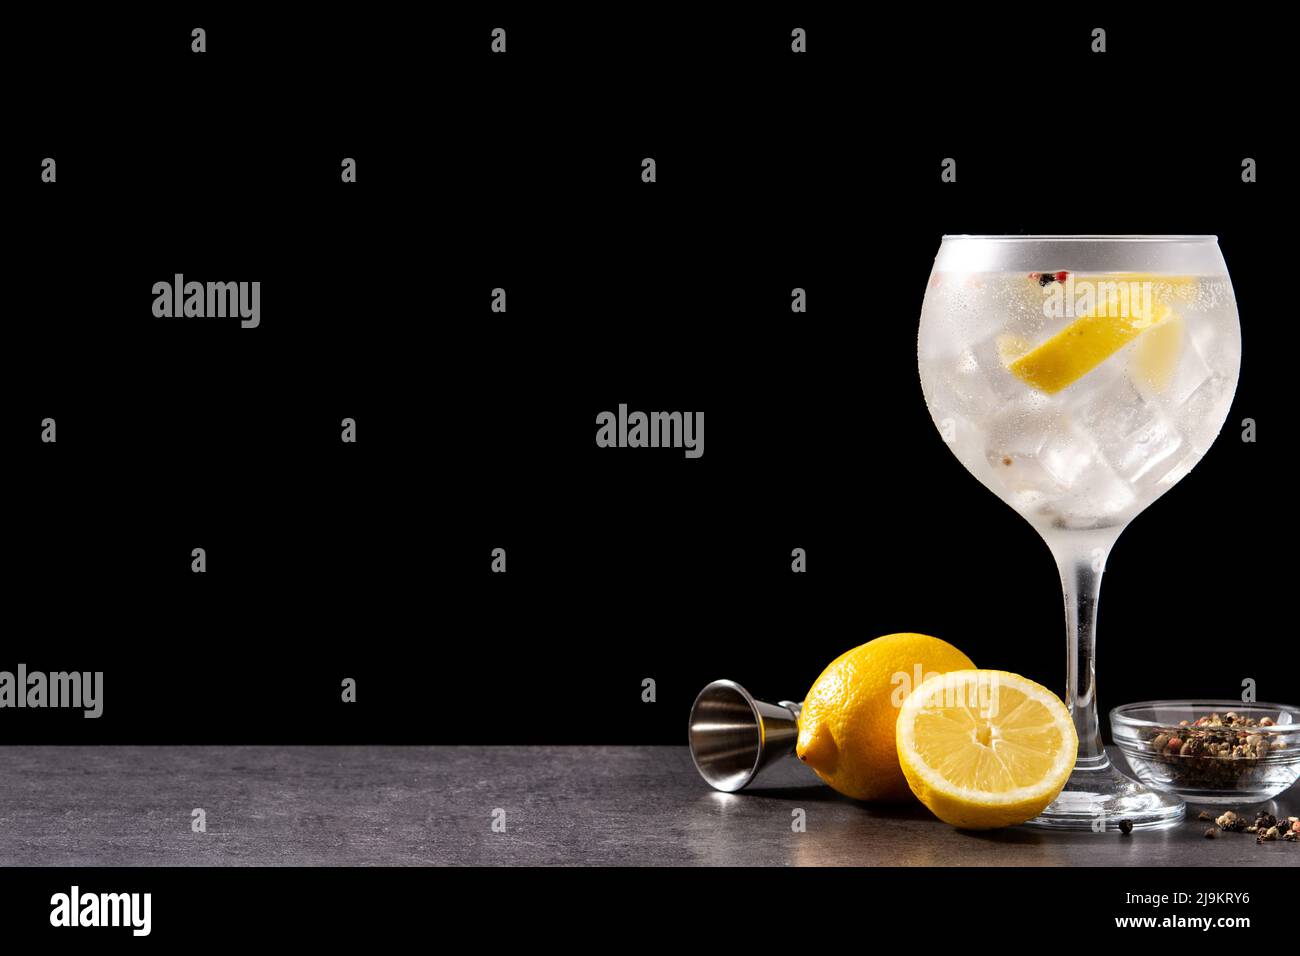 Gin tonic cocktail drink into a glass on black background Stock Photo